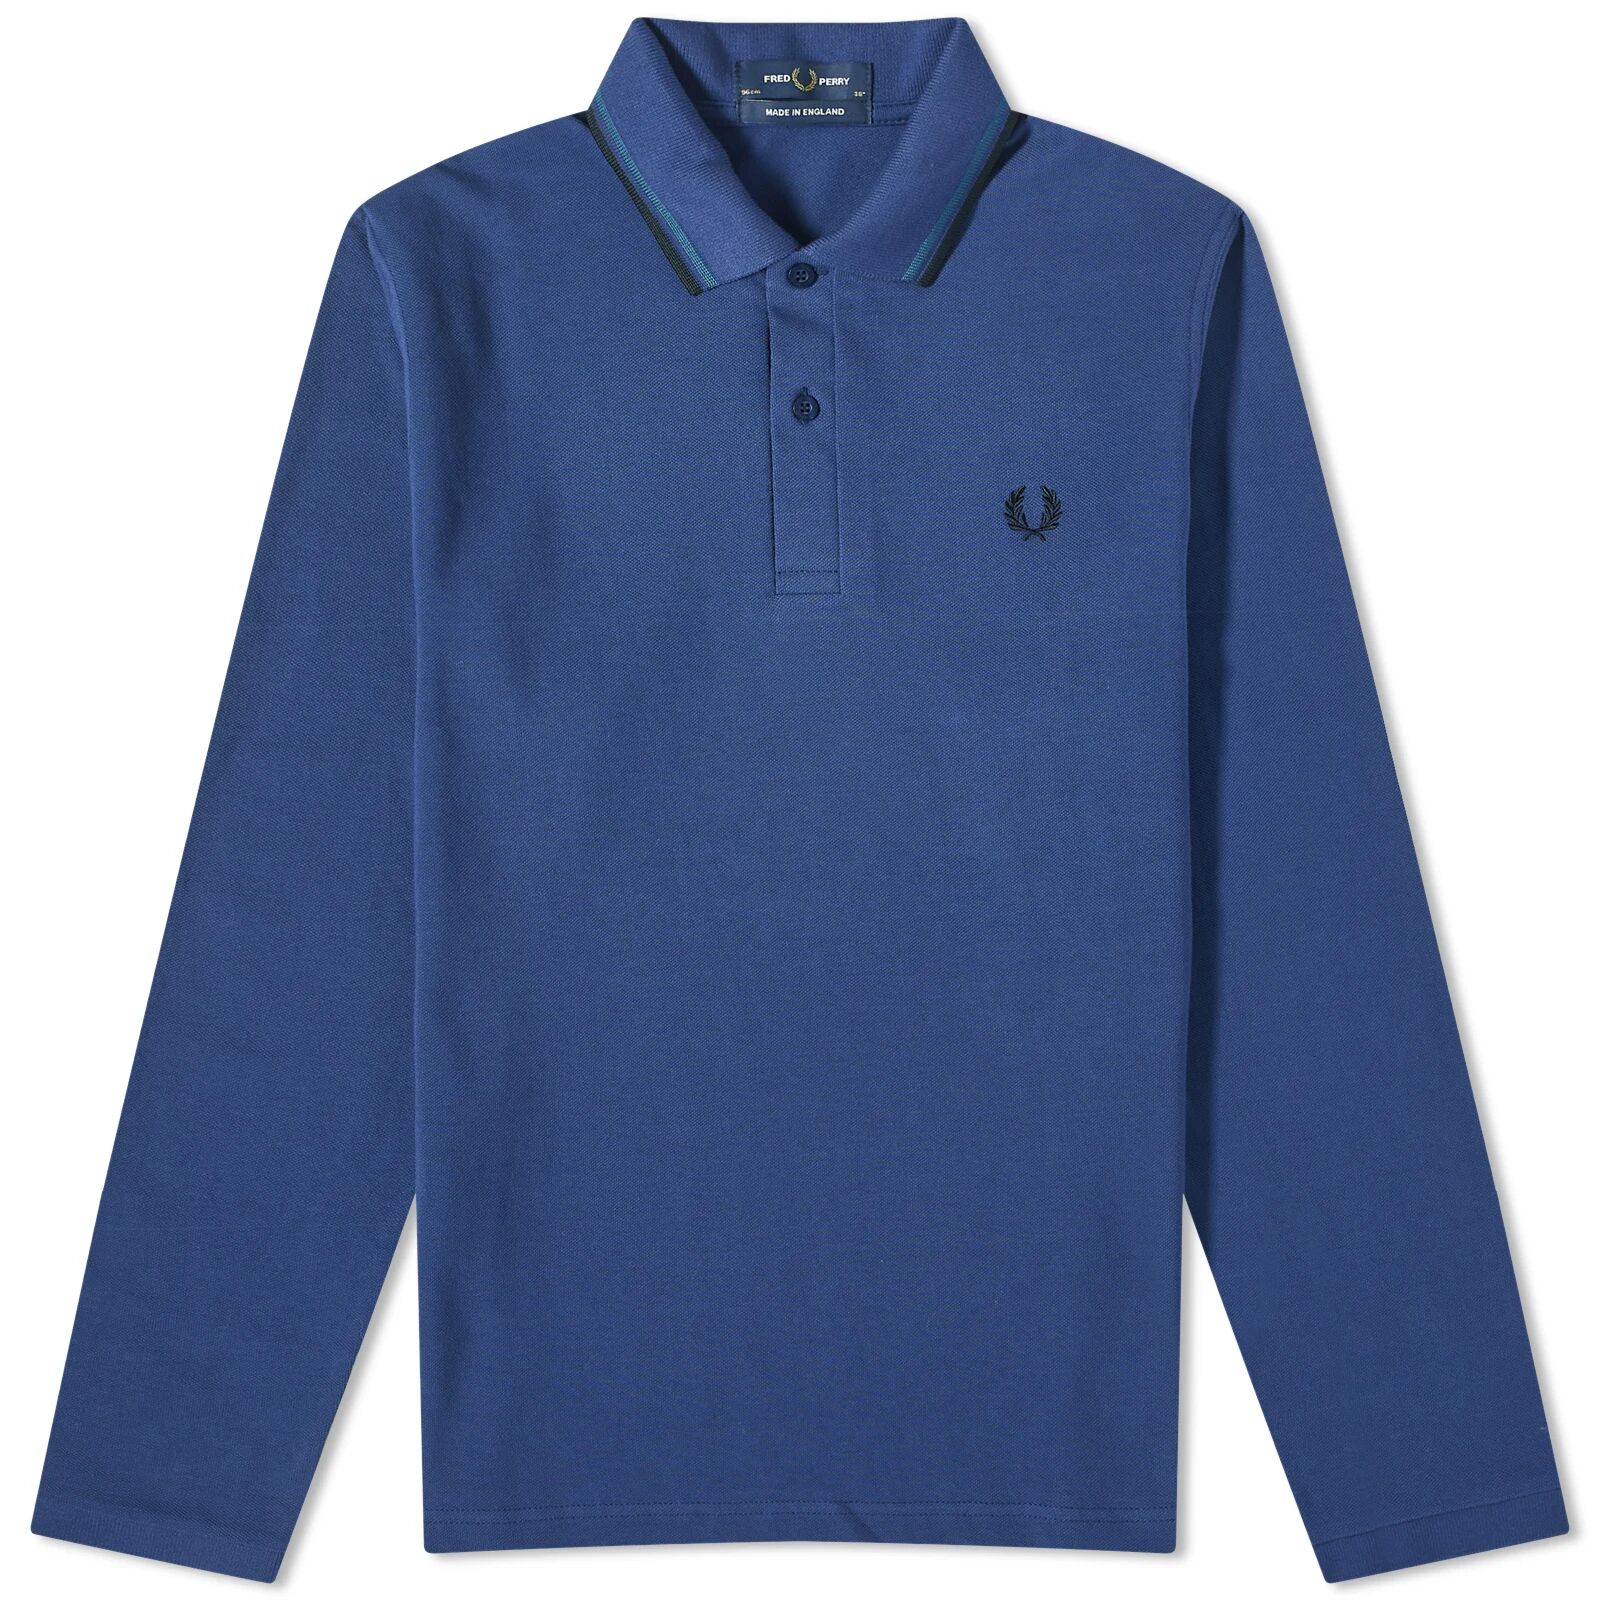 Fred Perry Men's Long Sleeve Twin Tipped Polo Shirt - Made in England in French Navy/Petrol Blue/Black, Size 38